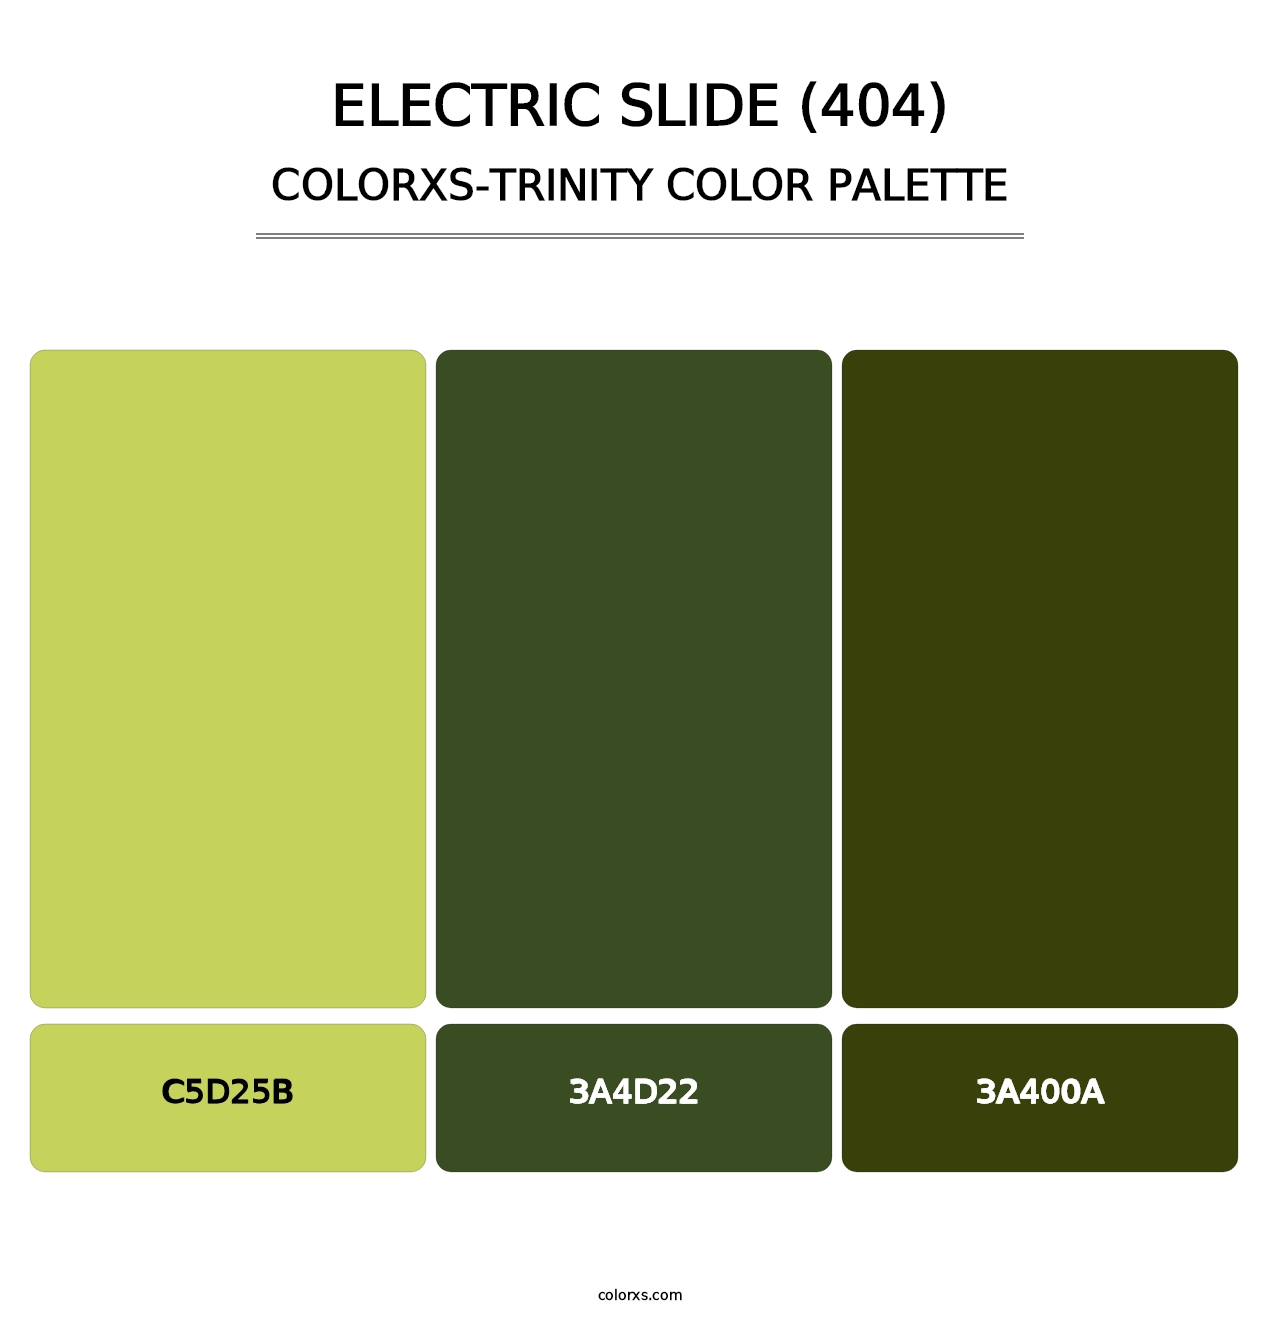 Electric Slide (404) - Colorxs Trinity Palette